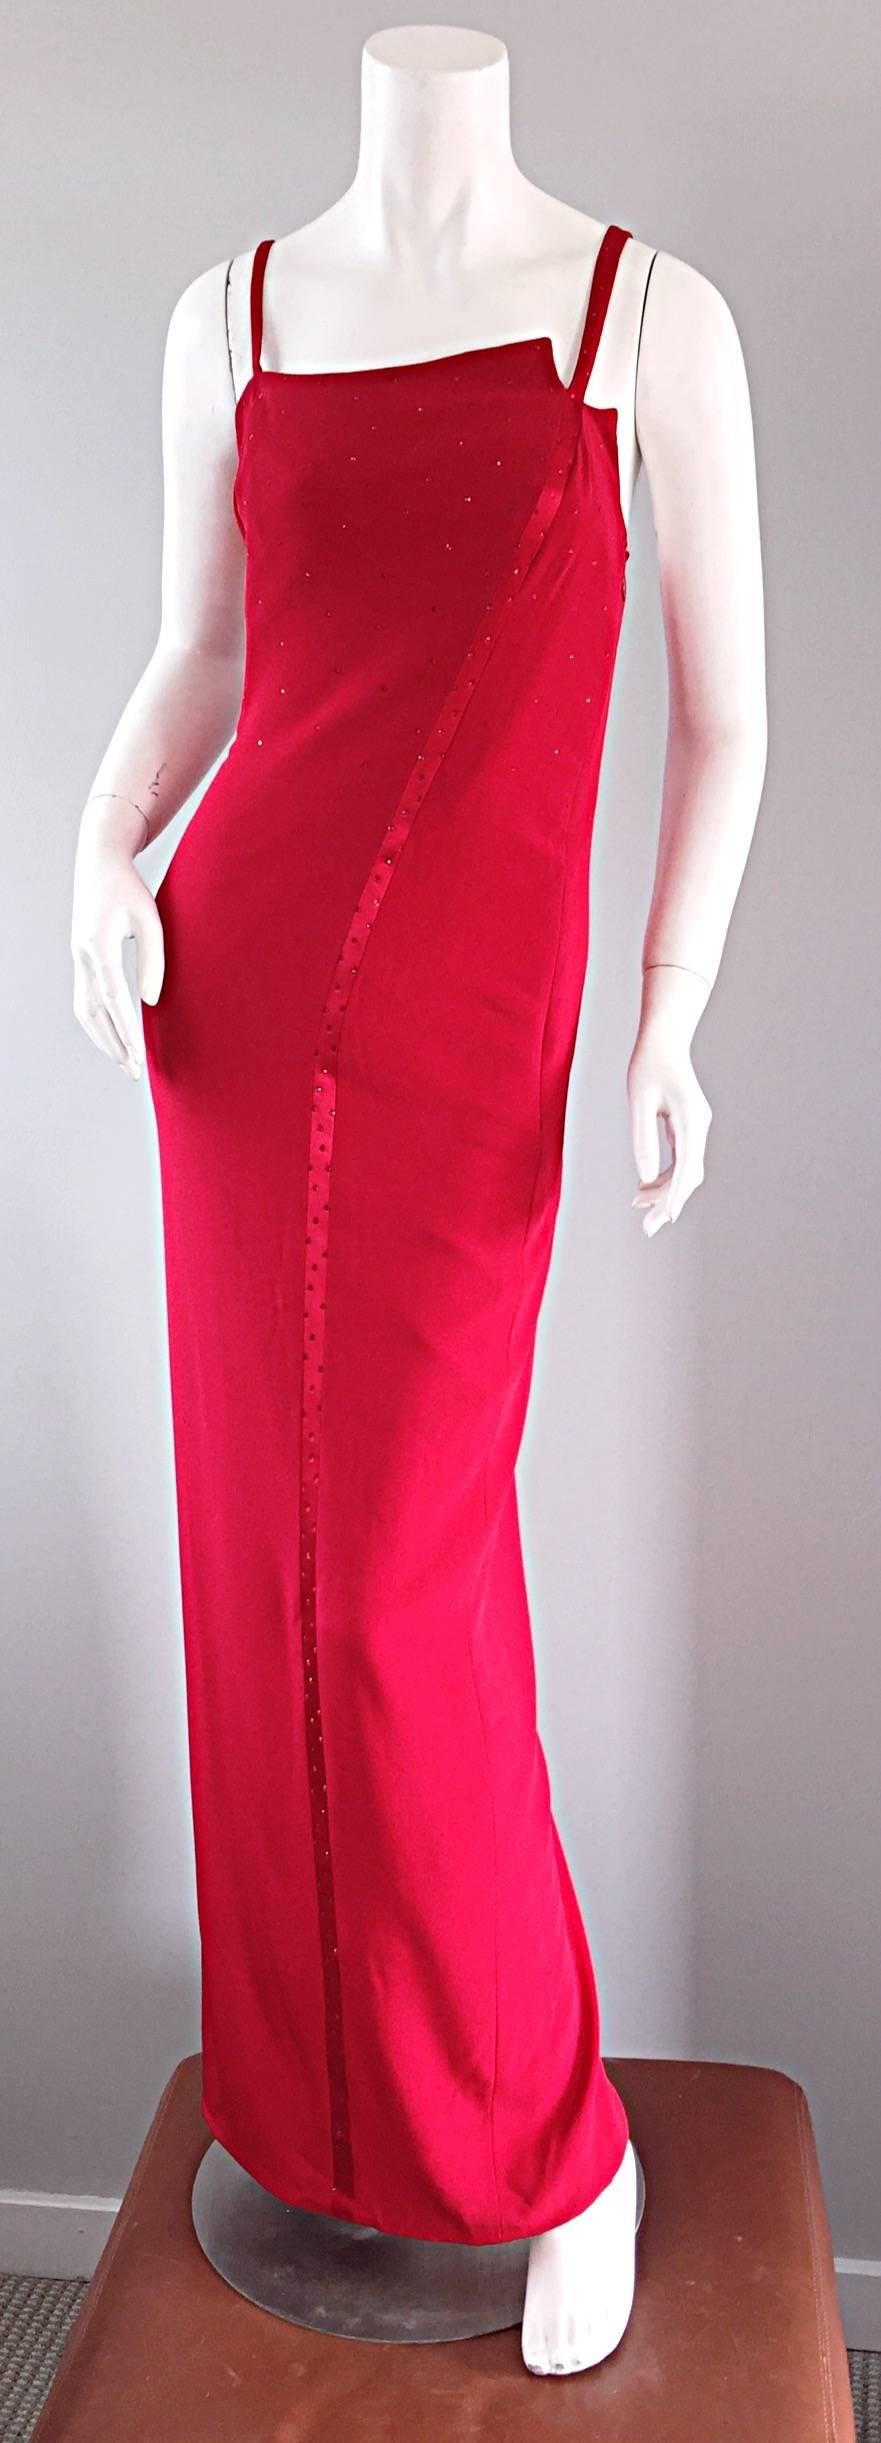 Sexy 1990s Lane Davis Size 8 Beverly Hills Hand Made Red Avant Garde Dress For Sale 1